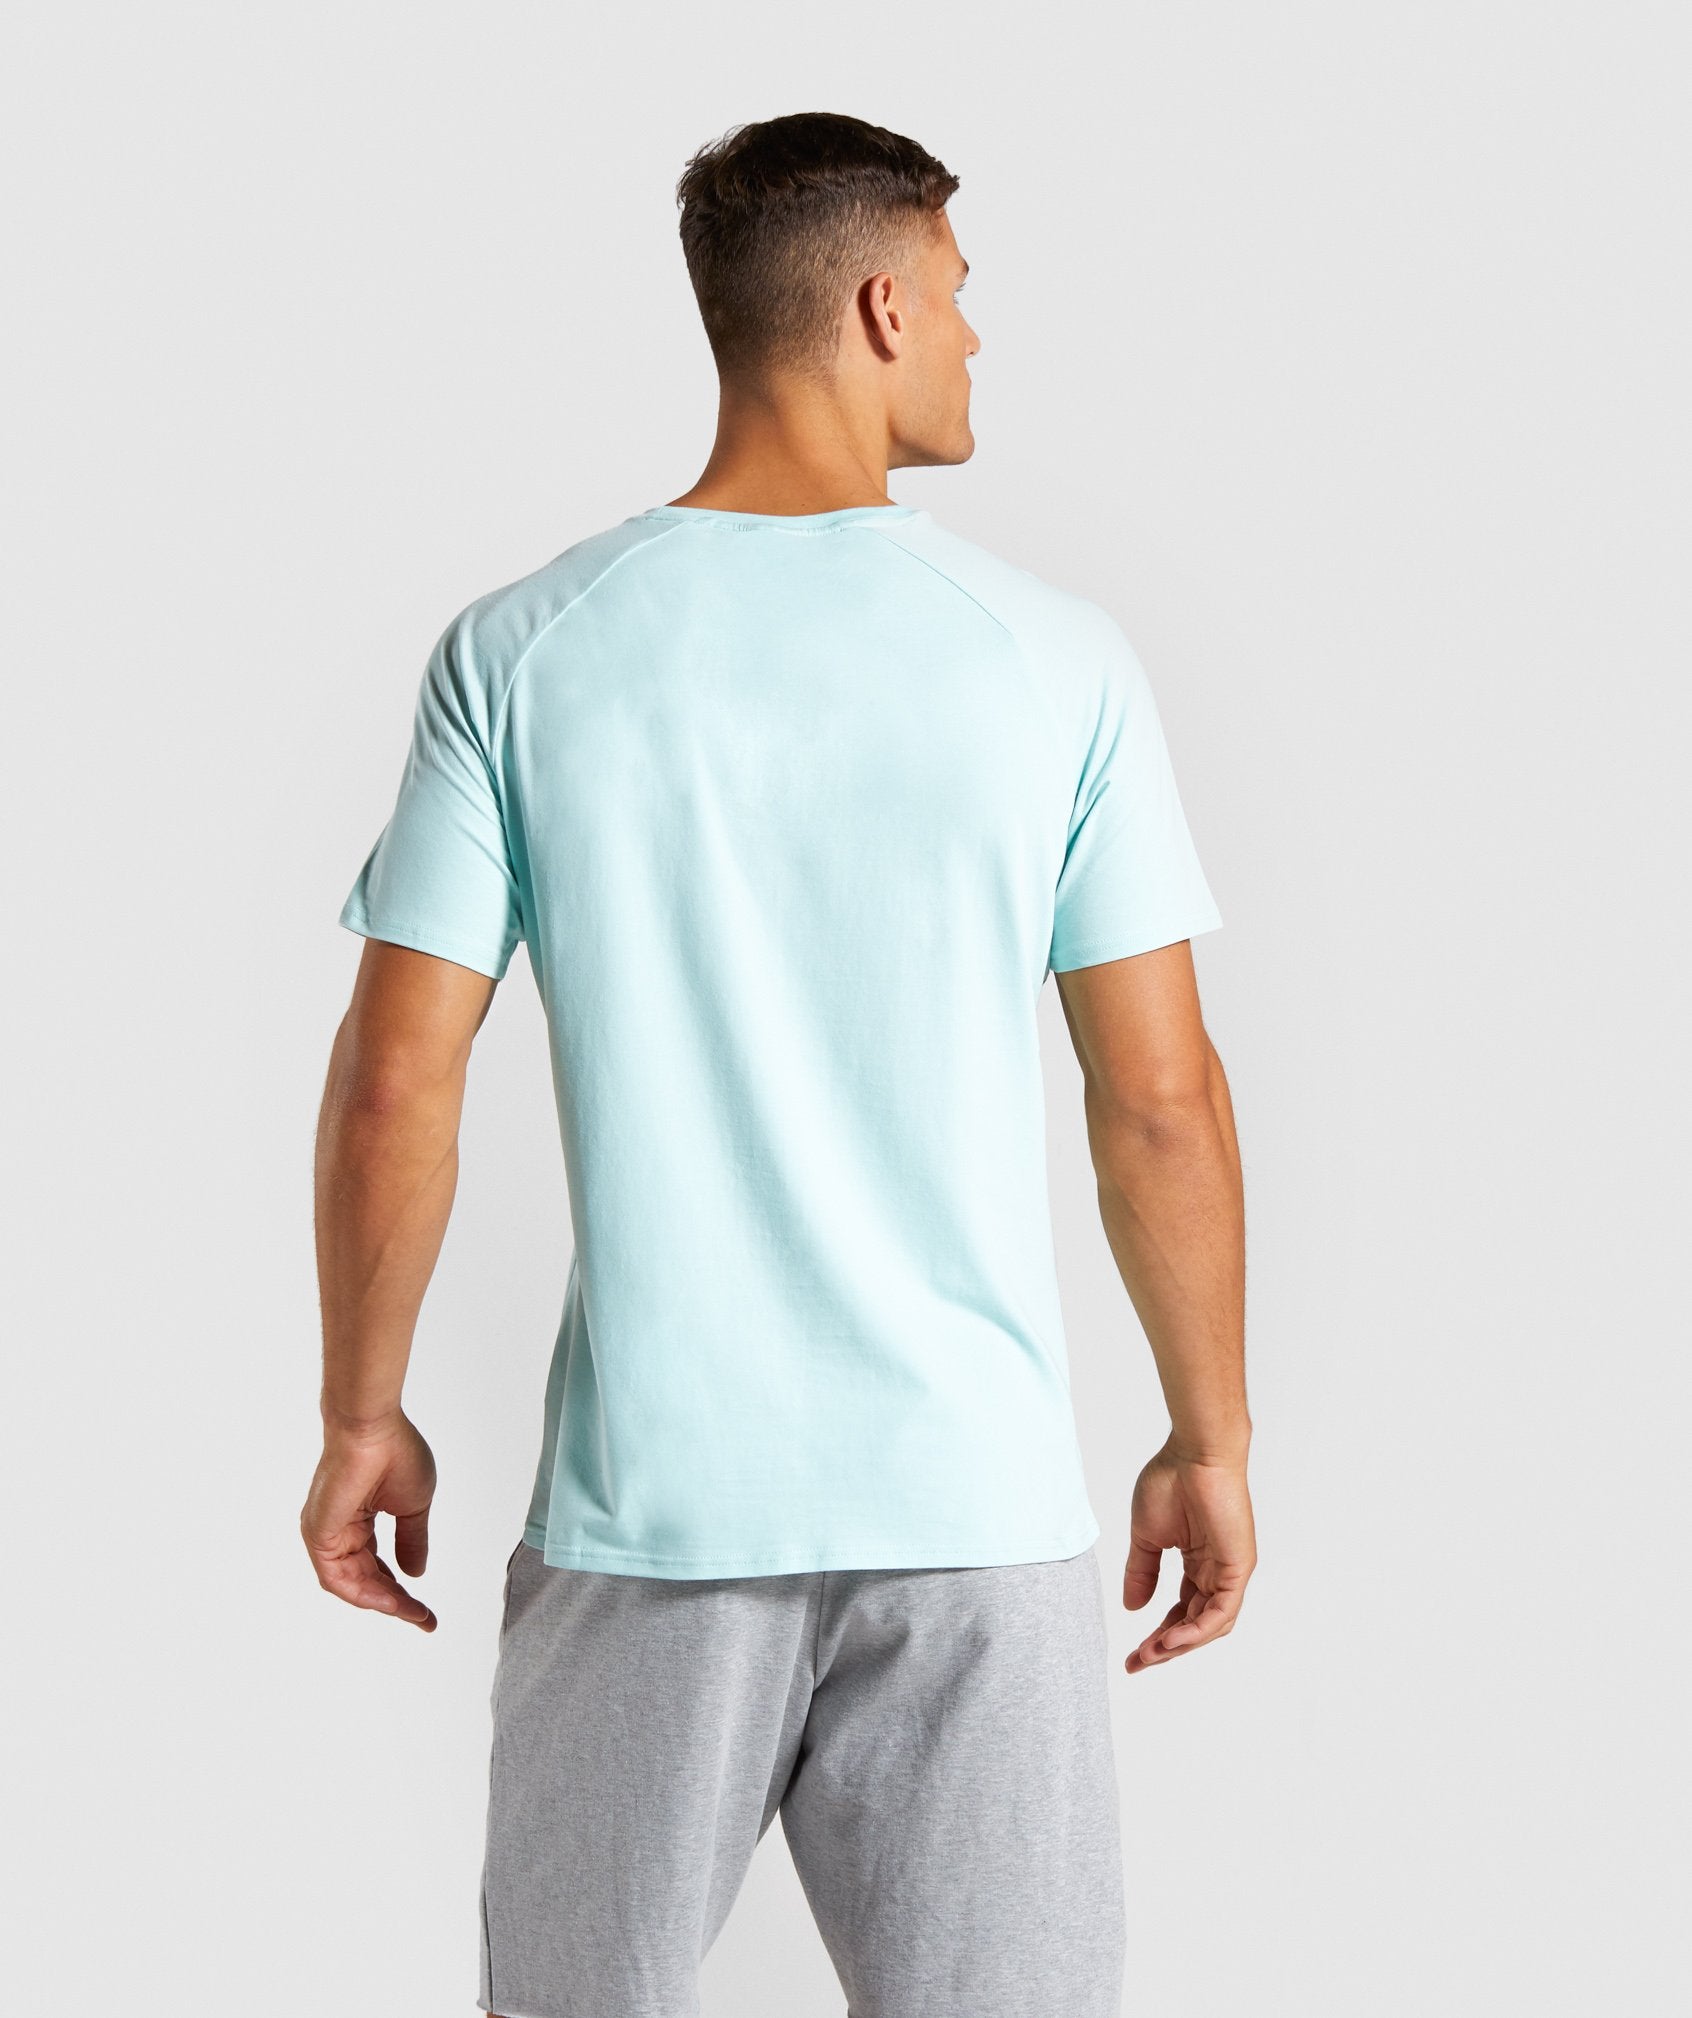 Apollo T-Shirt in Turquoise - view 2